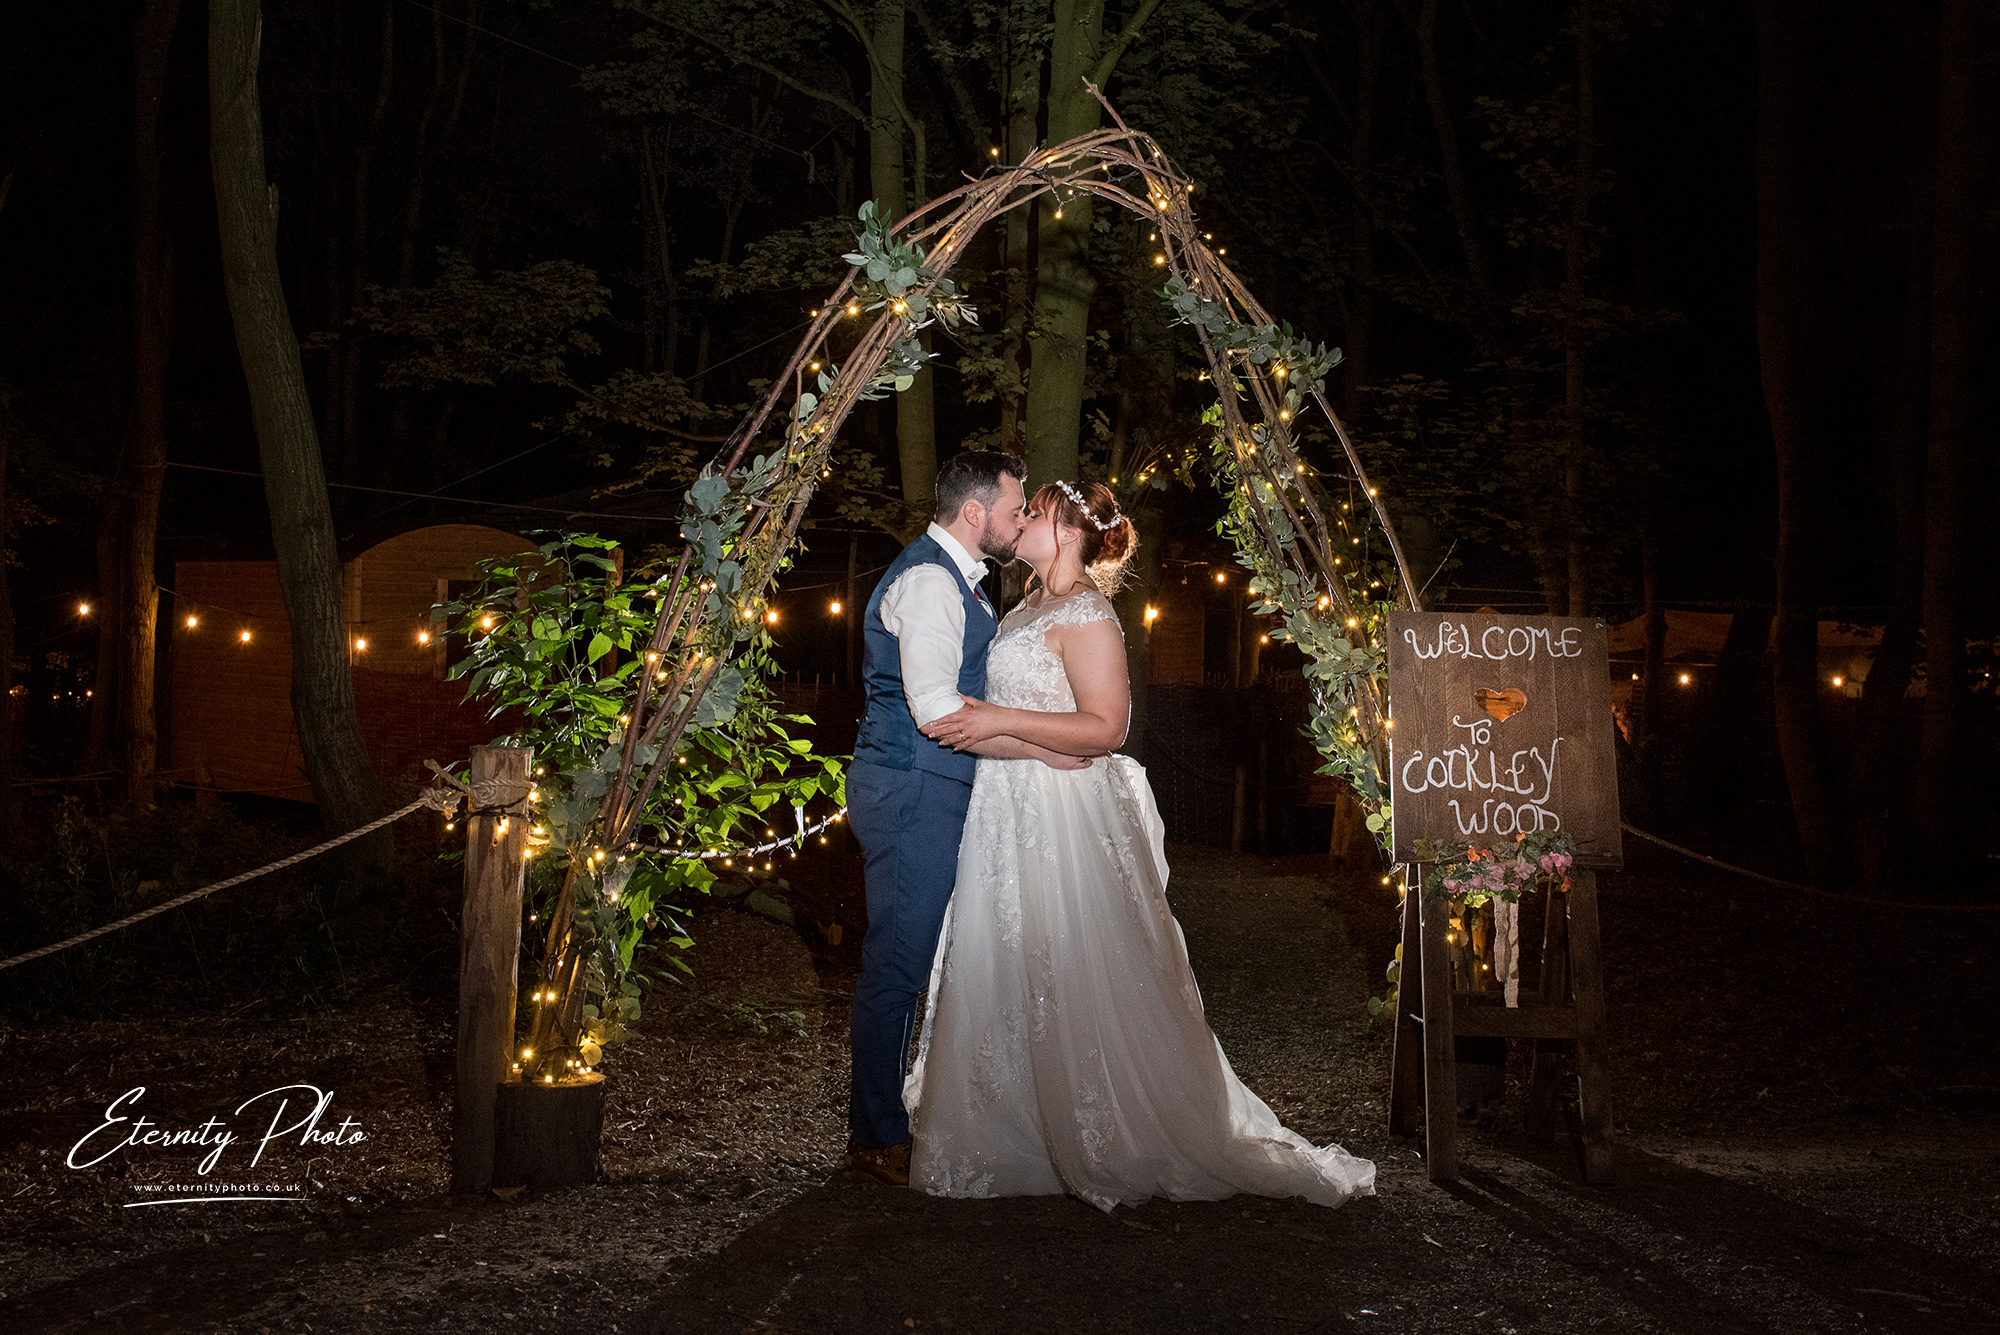 Couple kissing under lighted archway at night wedding.